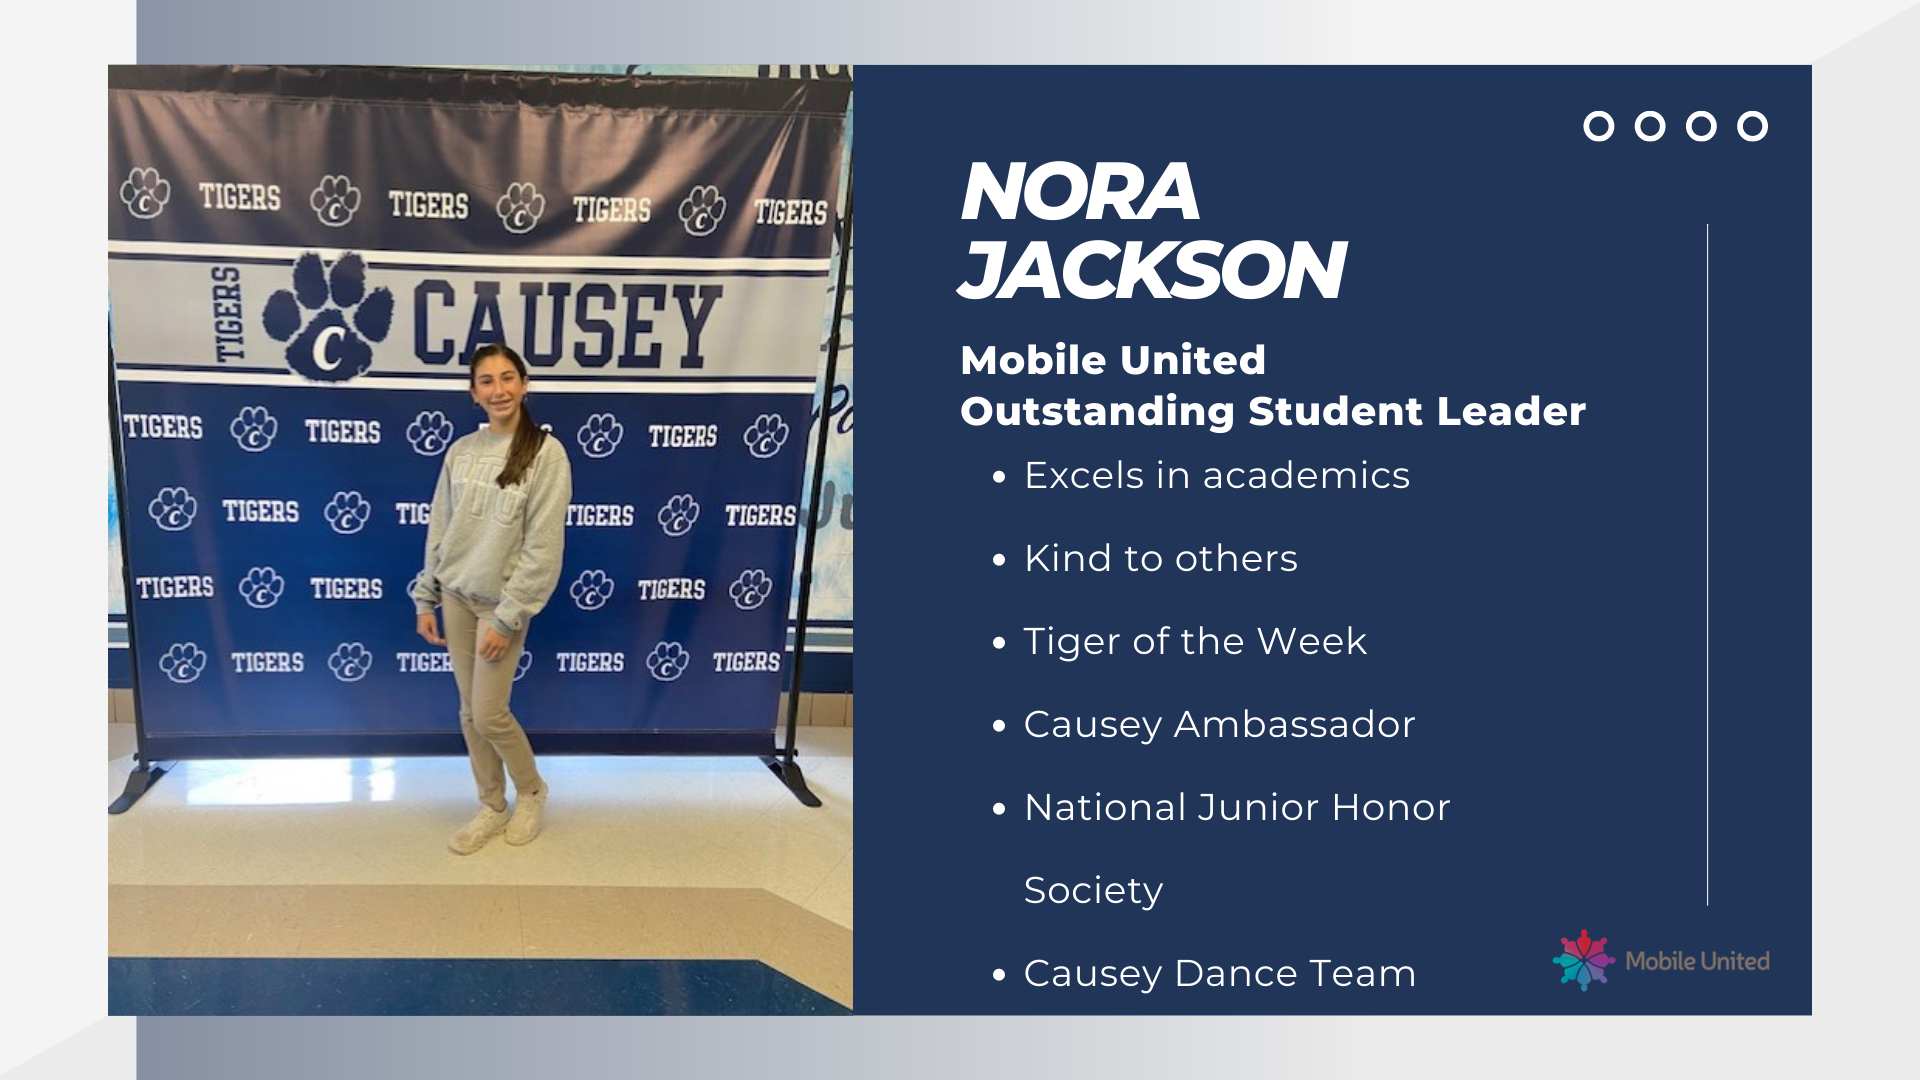 Nora Jackson, Mobile United Outstanding Student Leader